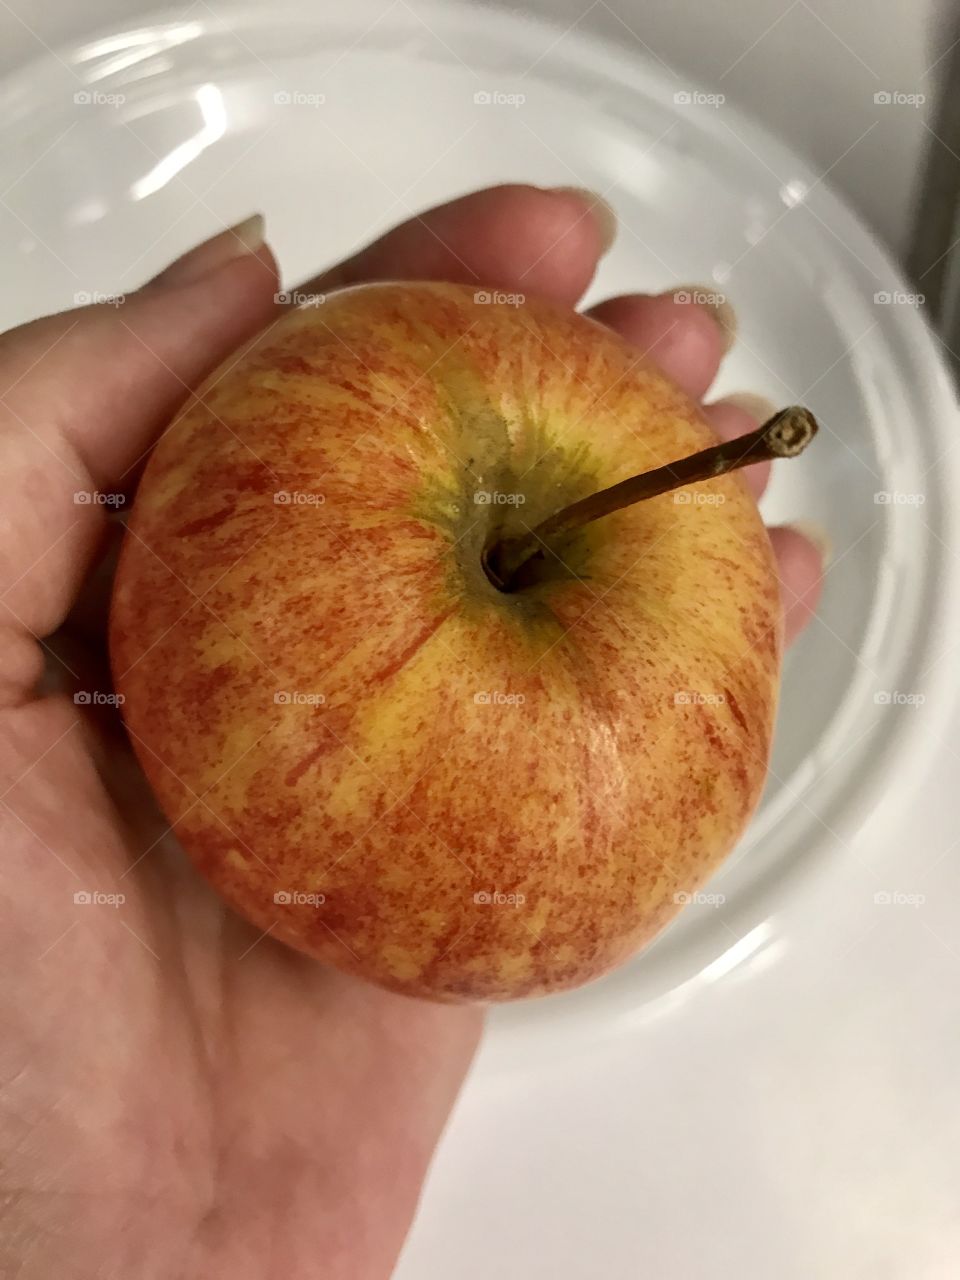 An apple in my hand